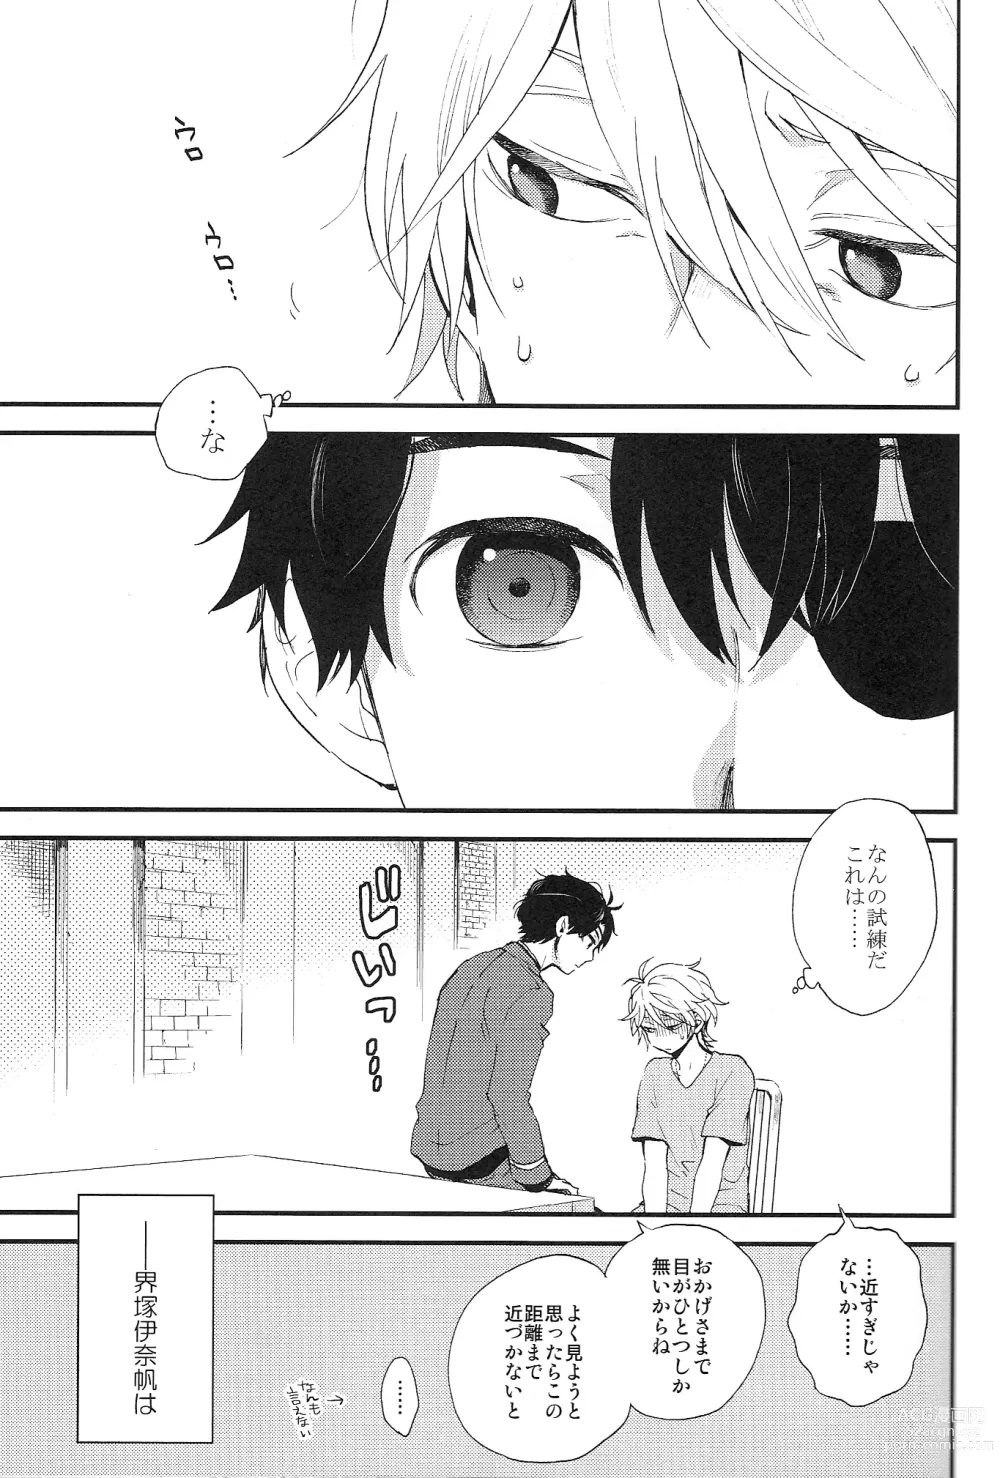 Page 2 of doujinshi 0 Distance